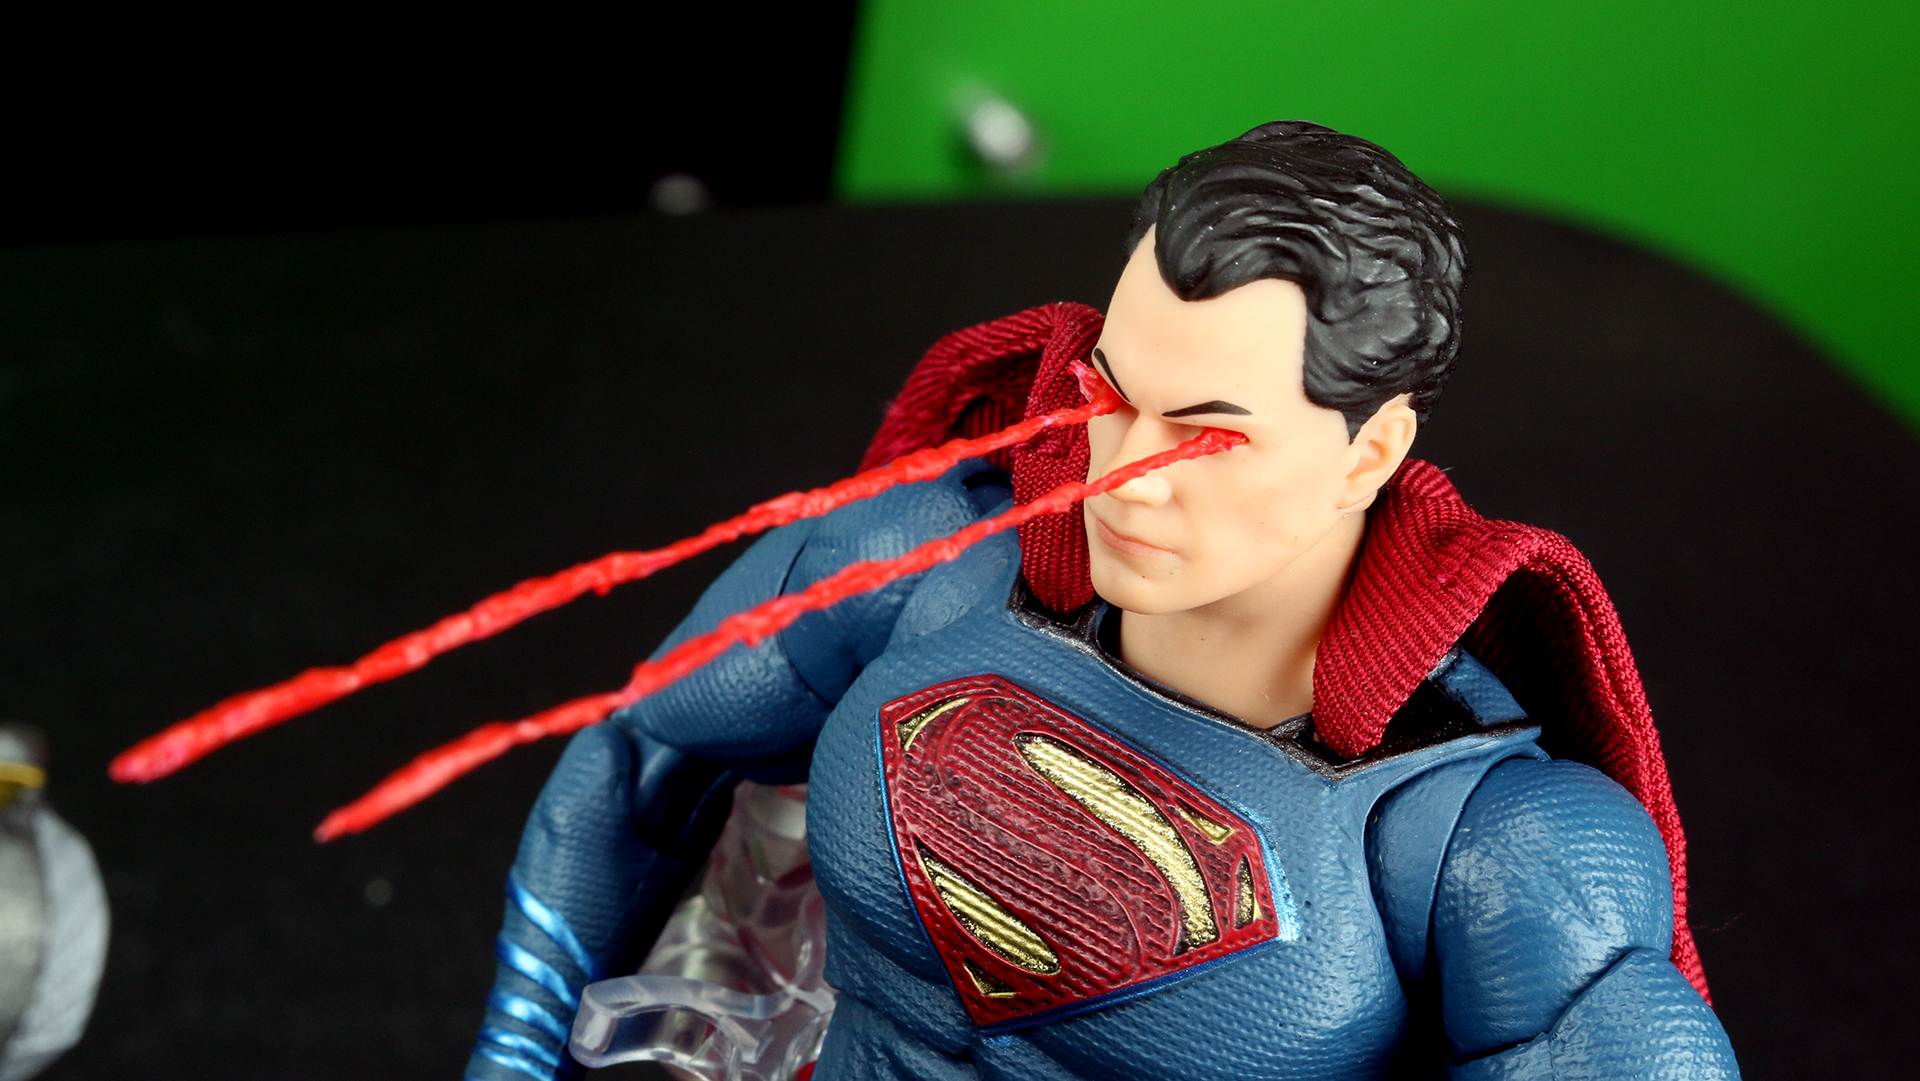 Batman V Superman: When Good Toys Come From Bad Movies